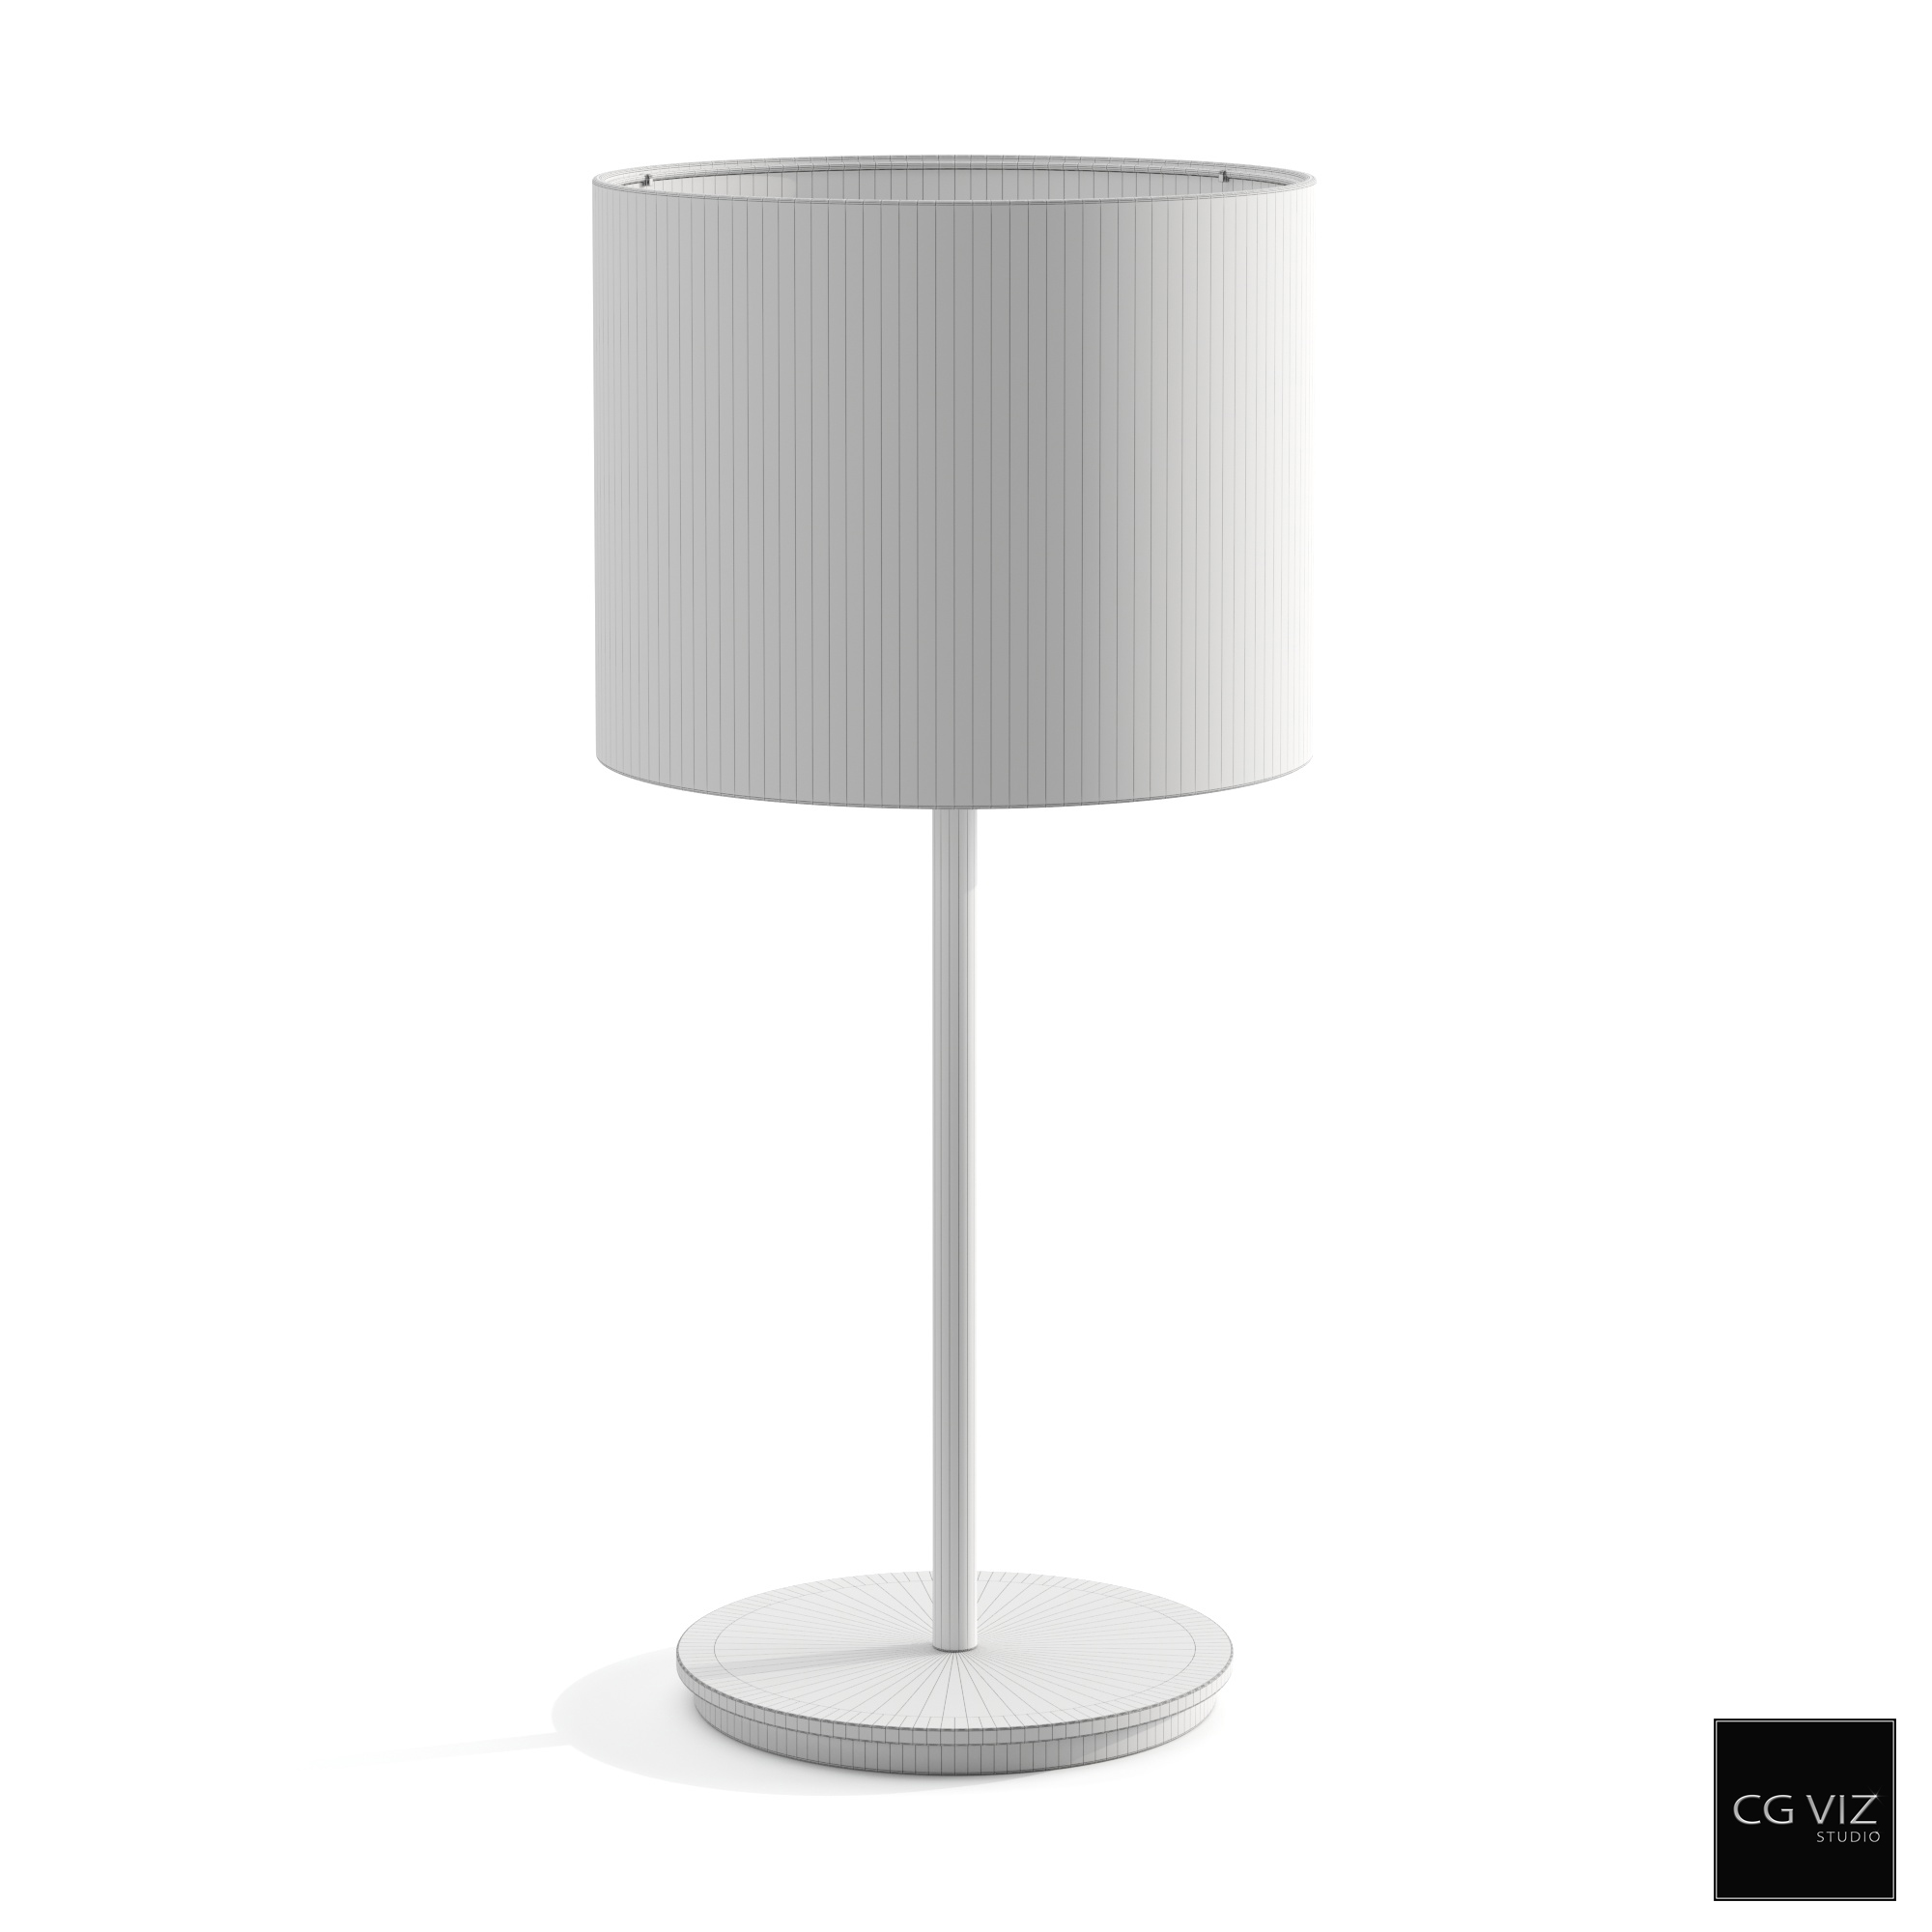 Wireframe View of Ikea Ringsta/Skaftet Table Lamp 3D Model